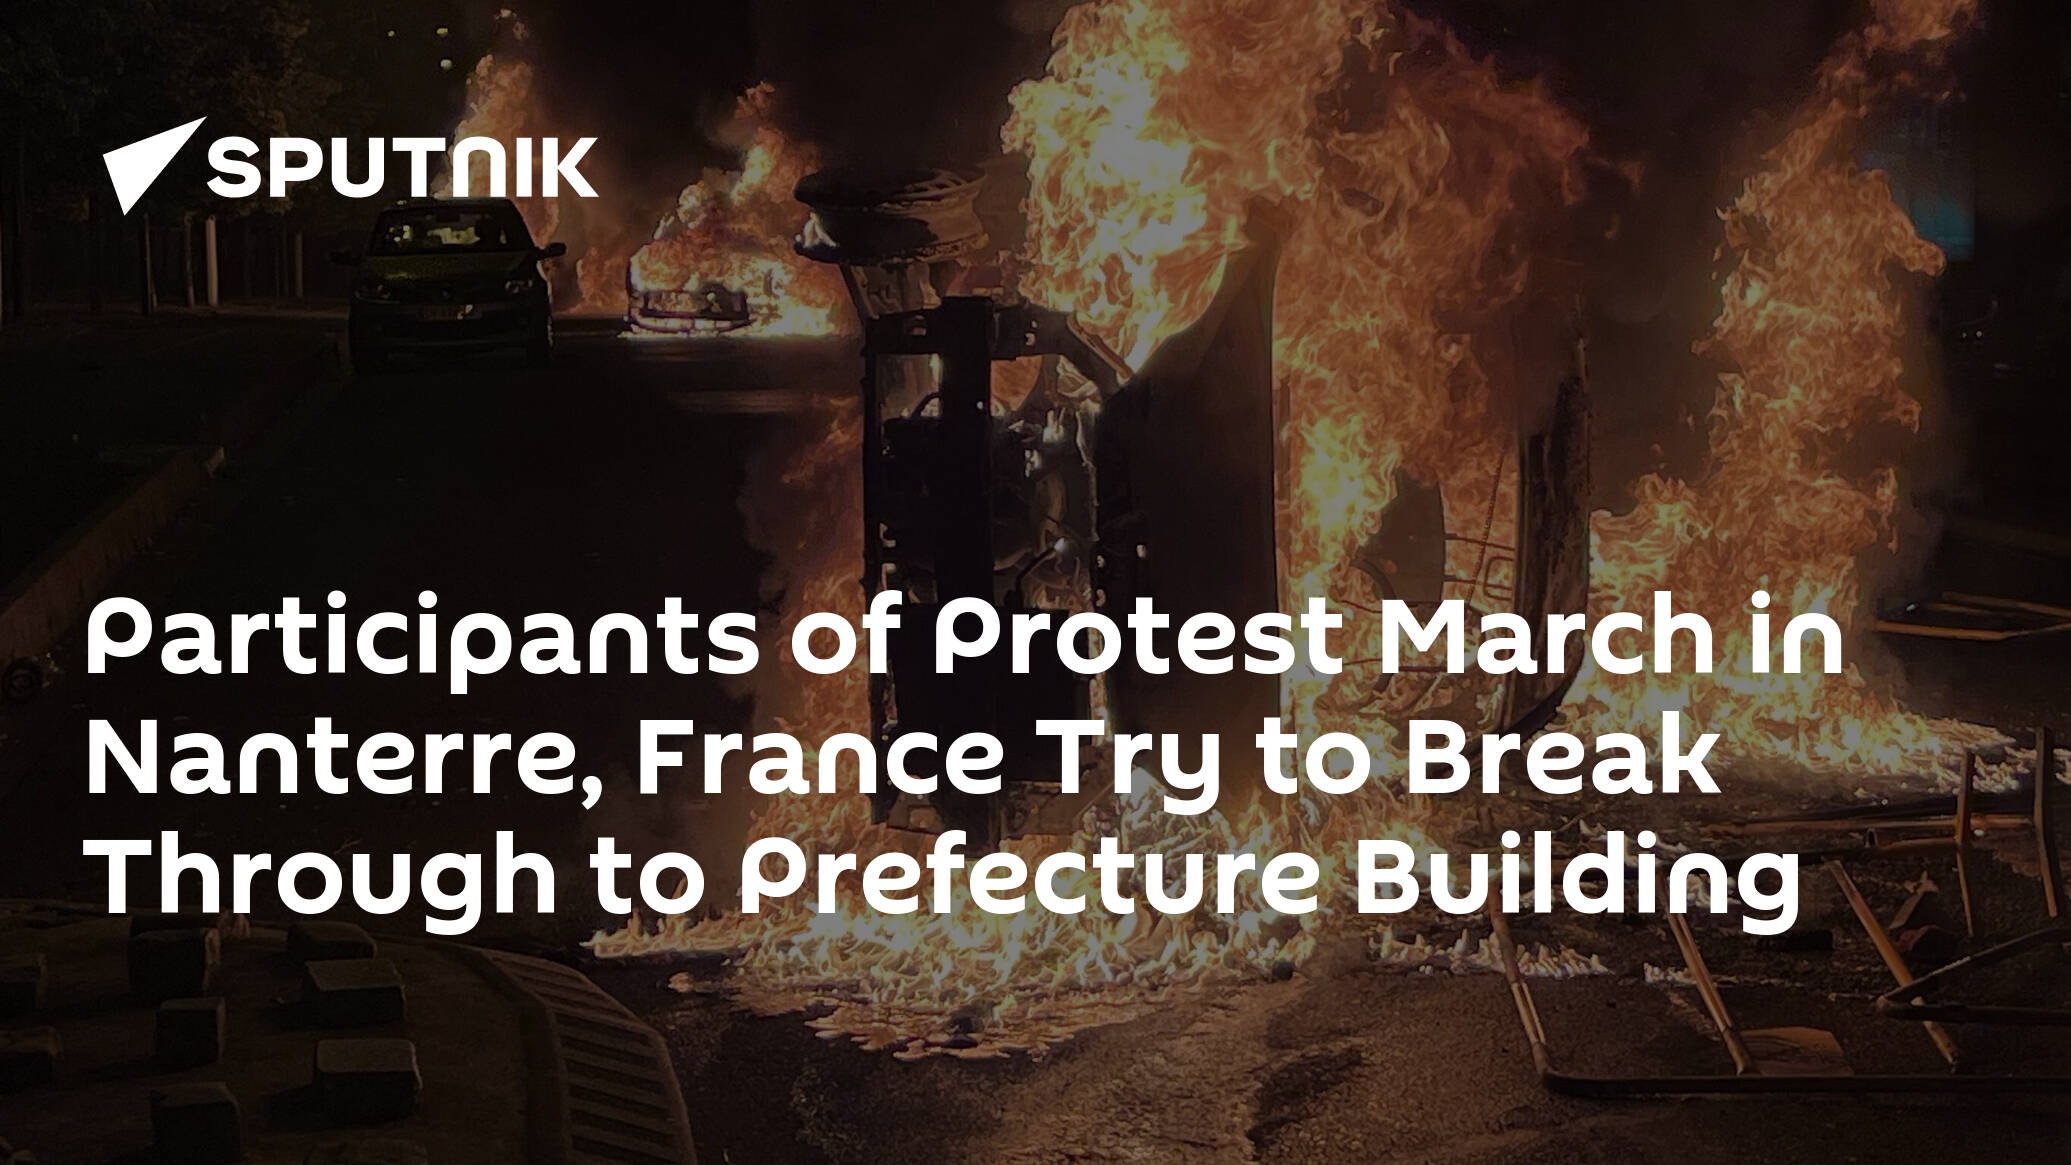 Participants of Protest March in Nanterre, France Try to Break Through to Prefecture Building